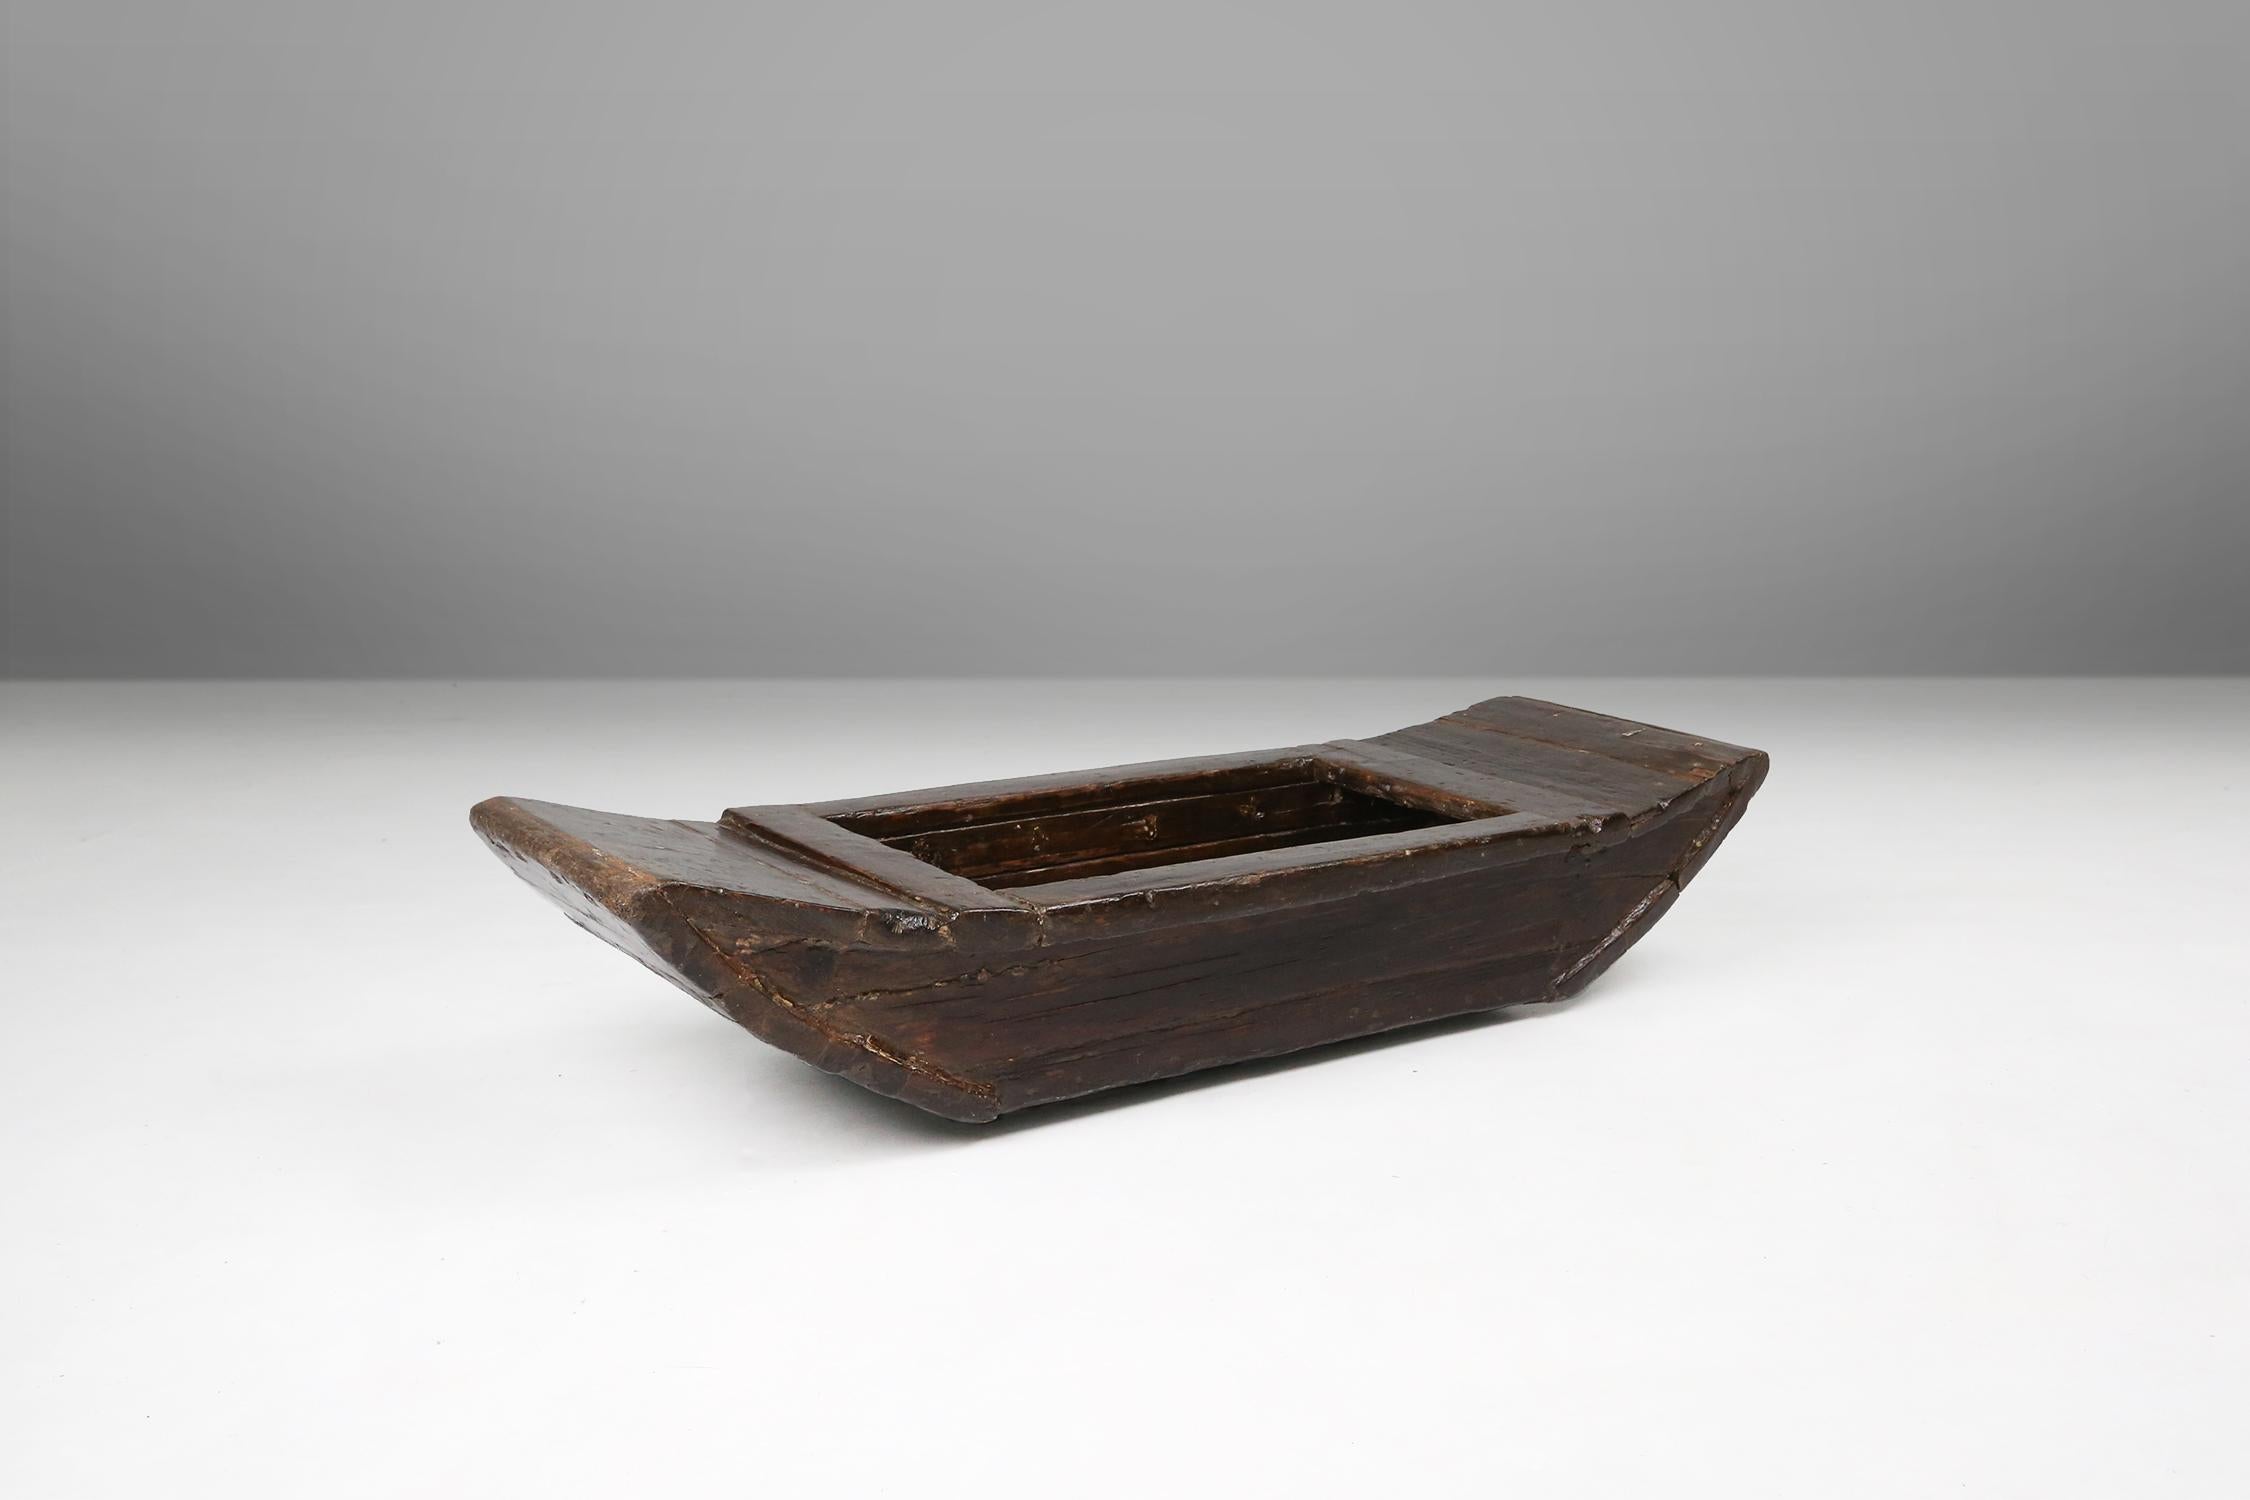 Antique handmade wooden trough or bowl, 19th century.

This is a rare antique handmade wooden trough or bowl, which can be used for decoration or as a (fruit) bowl or magazine holder. Beautiful piece, handmade out of solid wood. A true Wabi Sabi